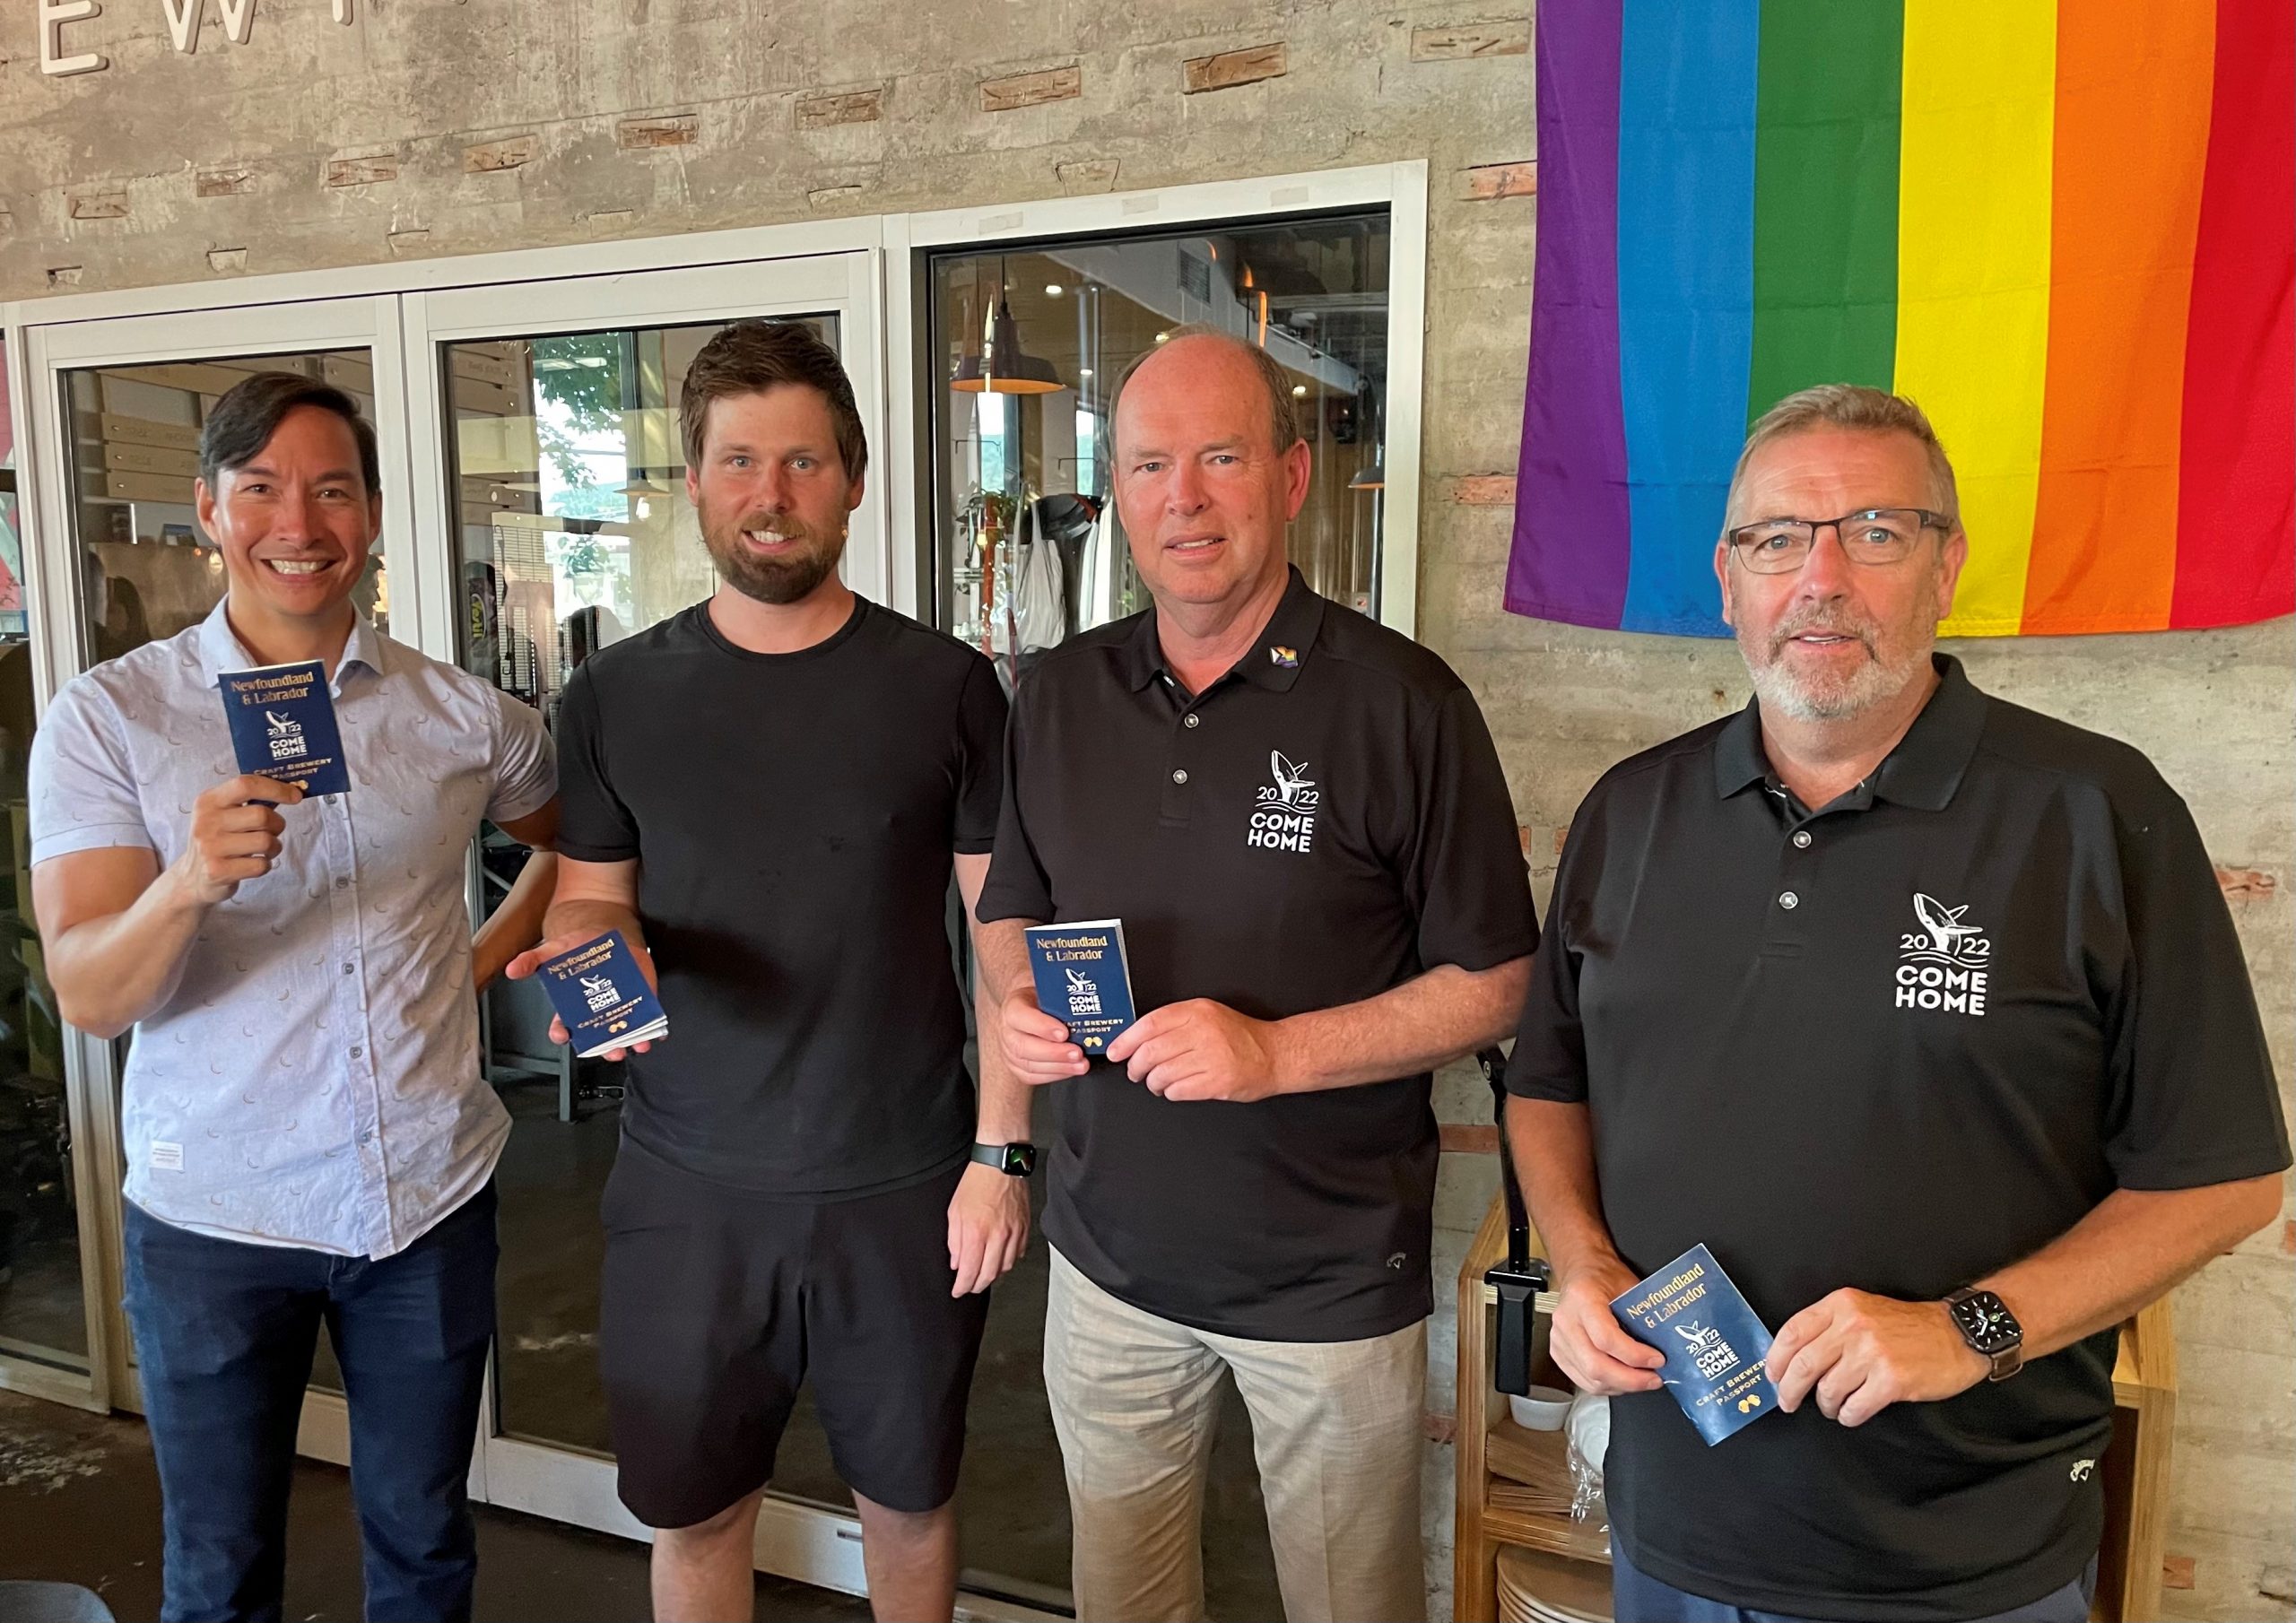 Minister Steve Crocker, Minister John G. Abbott, Justin Fong of Quidi Vidi Brewery and Phil Maloney of Bannerman Brewery showing their Come Home 2022 Craft Brewery Passports